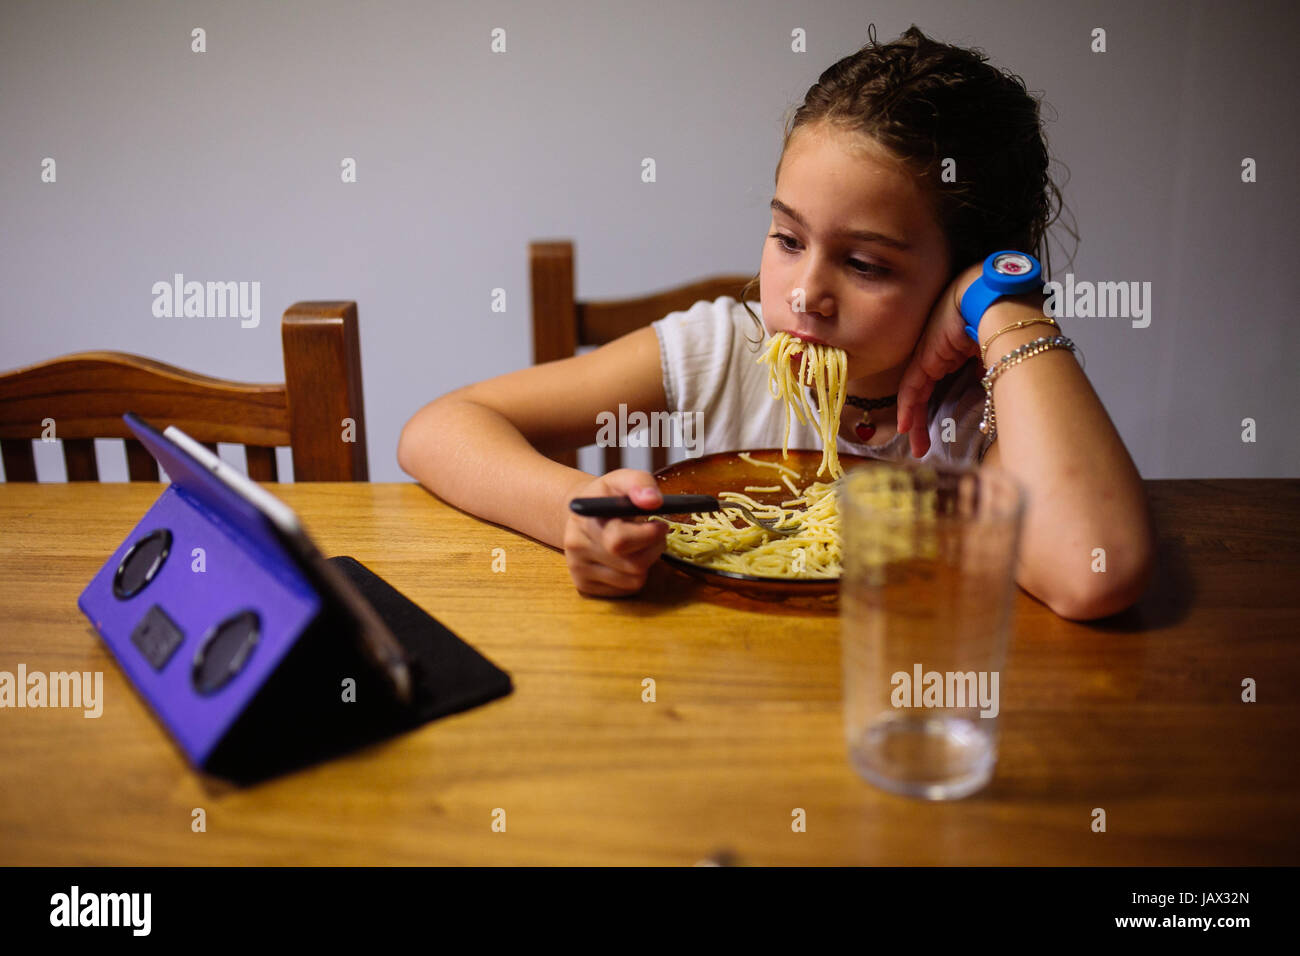 Young girl eating spaghetti pasta rudely while watching a tablet Stock Photo